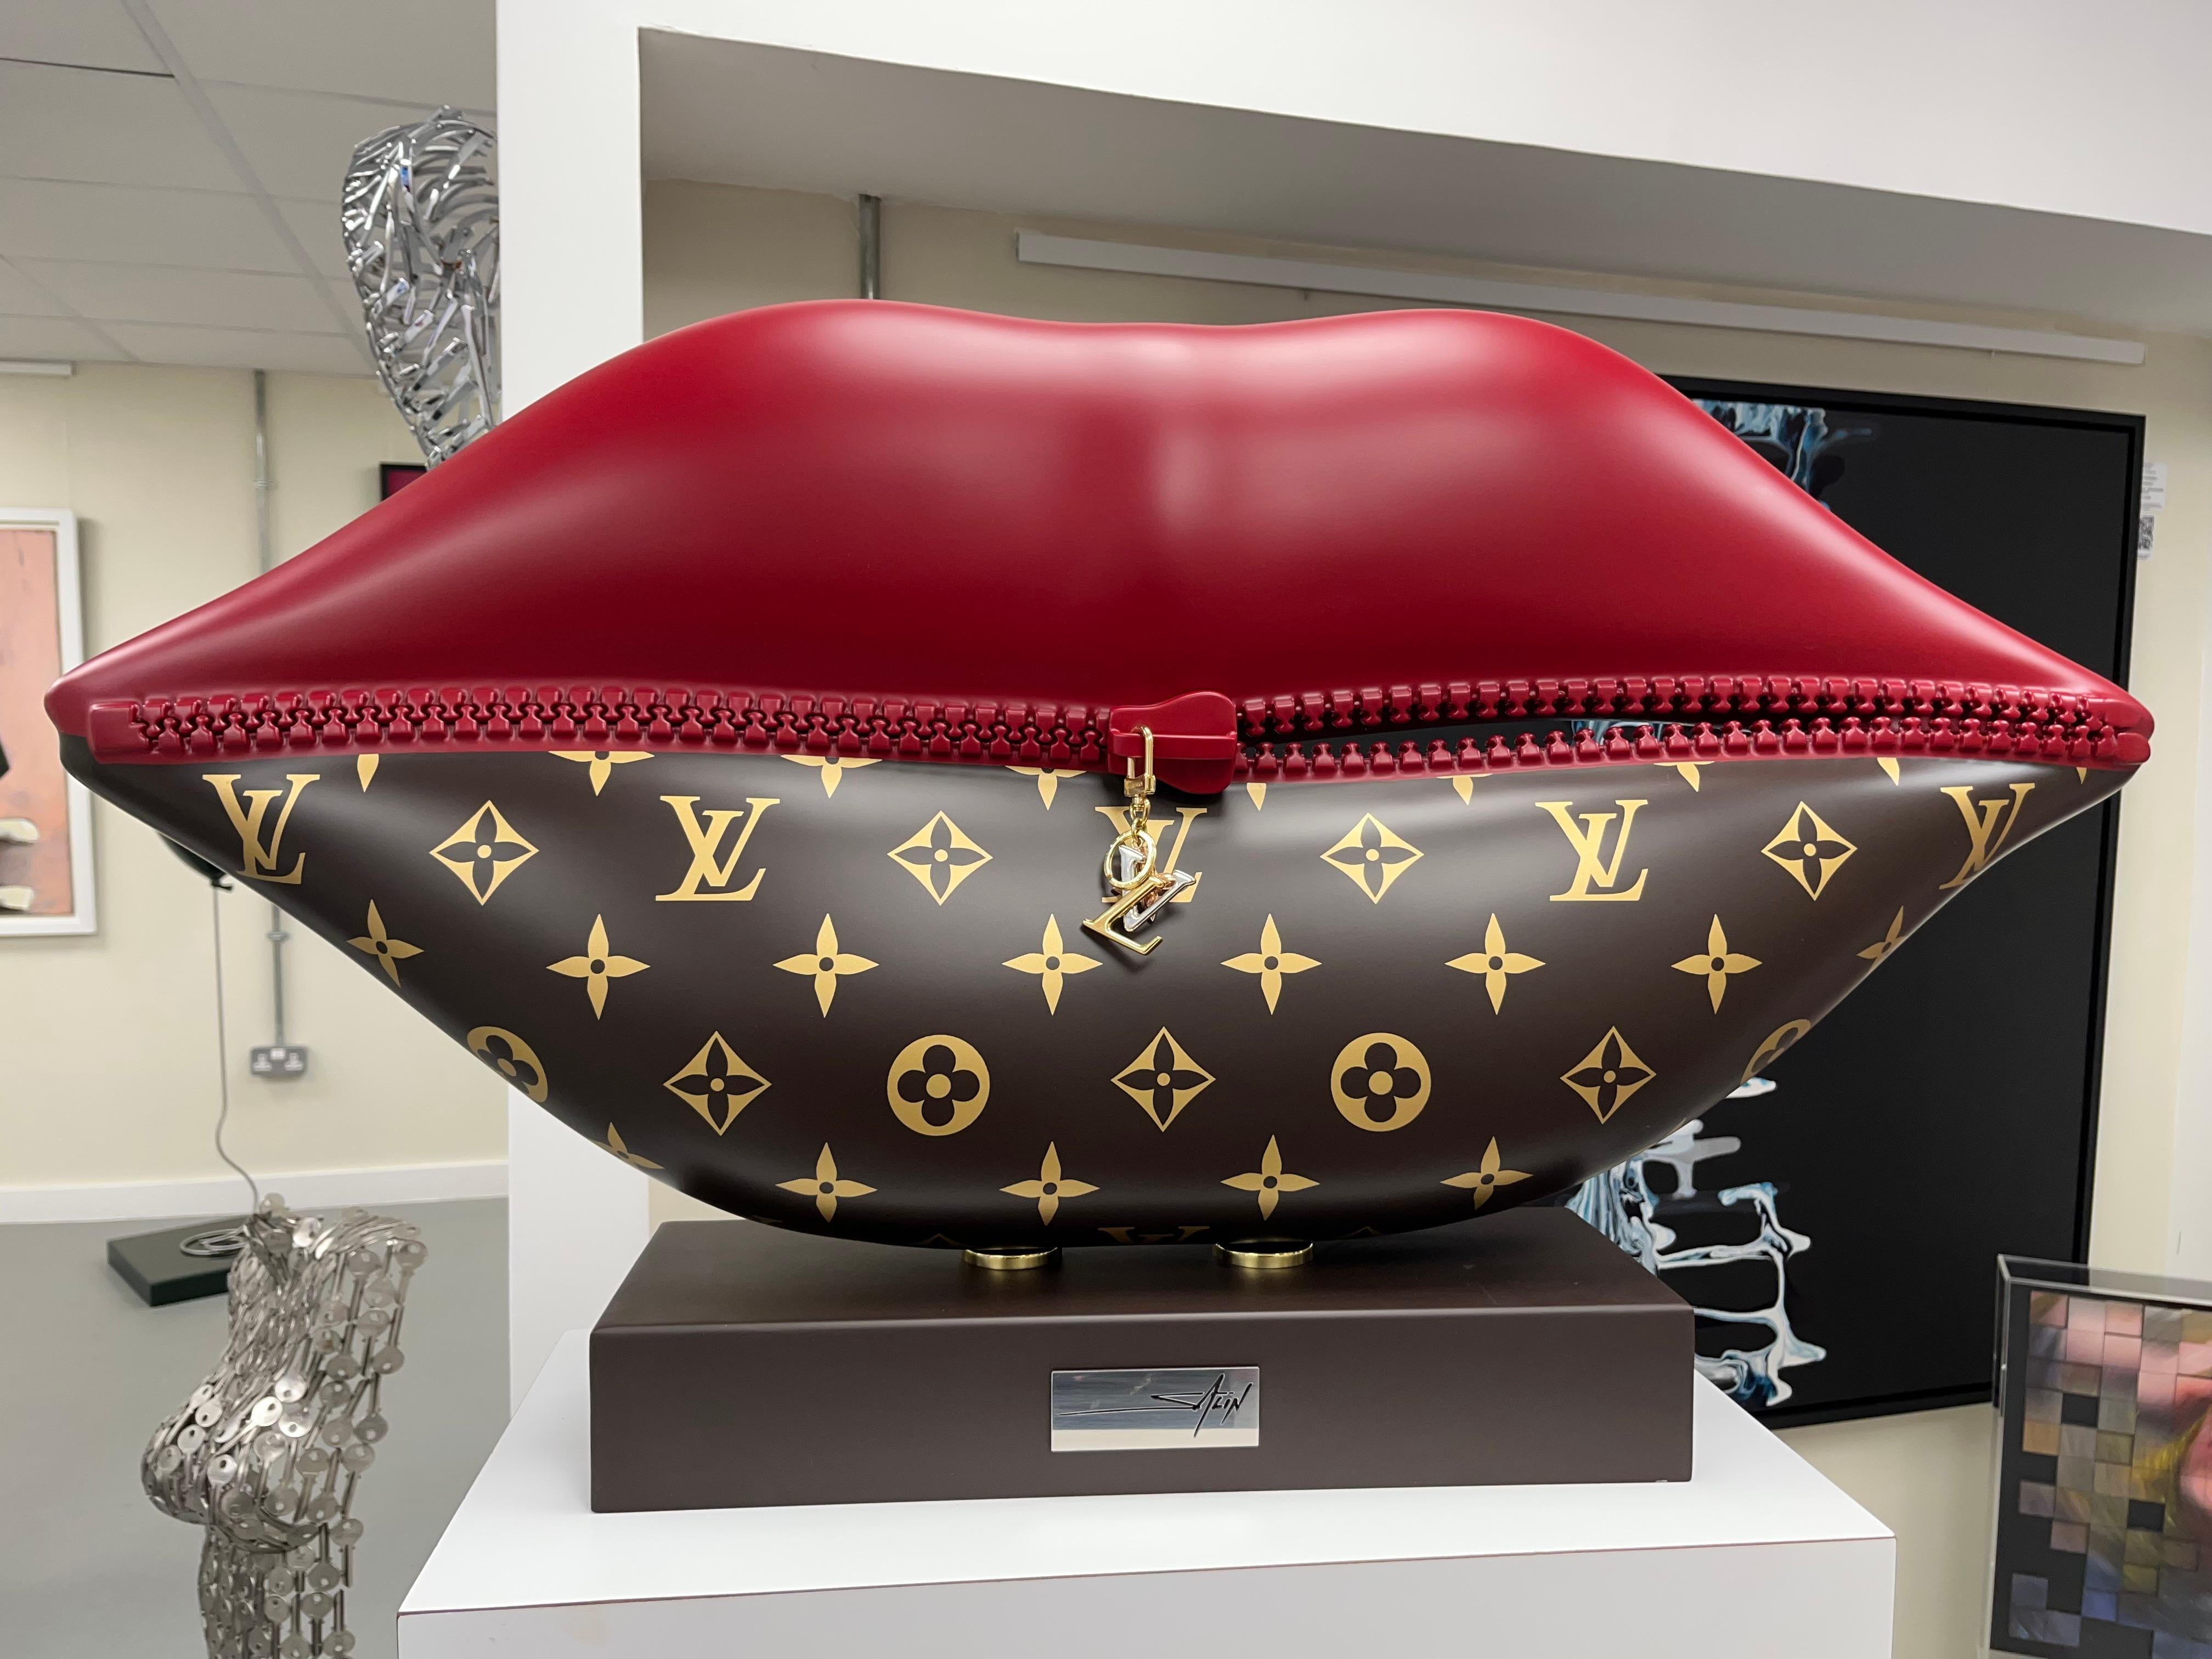 Original Sculpture 

Beautiful Pop Art sculpture based upon our love of brand and consumerism. 

Hand crafted and painted in France. The artist, Erik Salin works tirelessly to recreate the Louis Vuitton brand with much integrity and skill. This